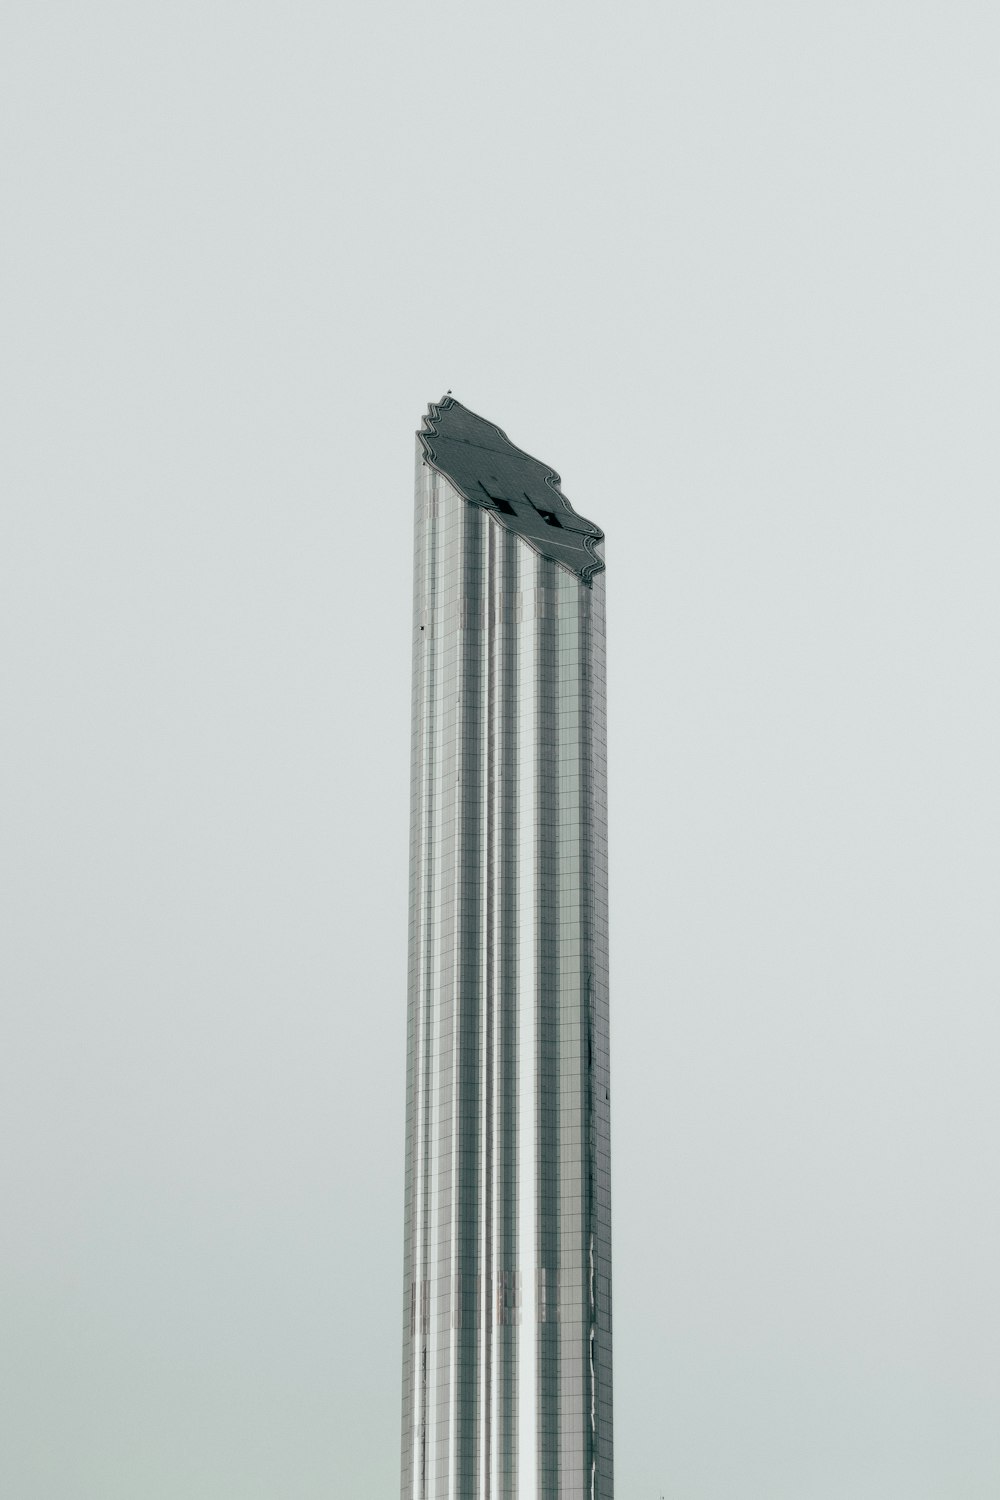 a tall building with a curved top